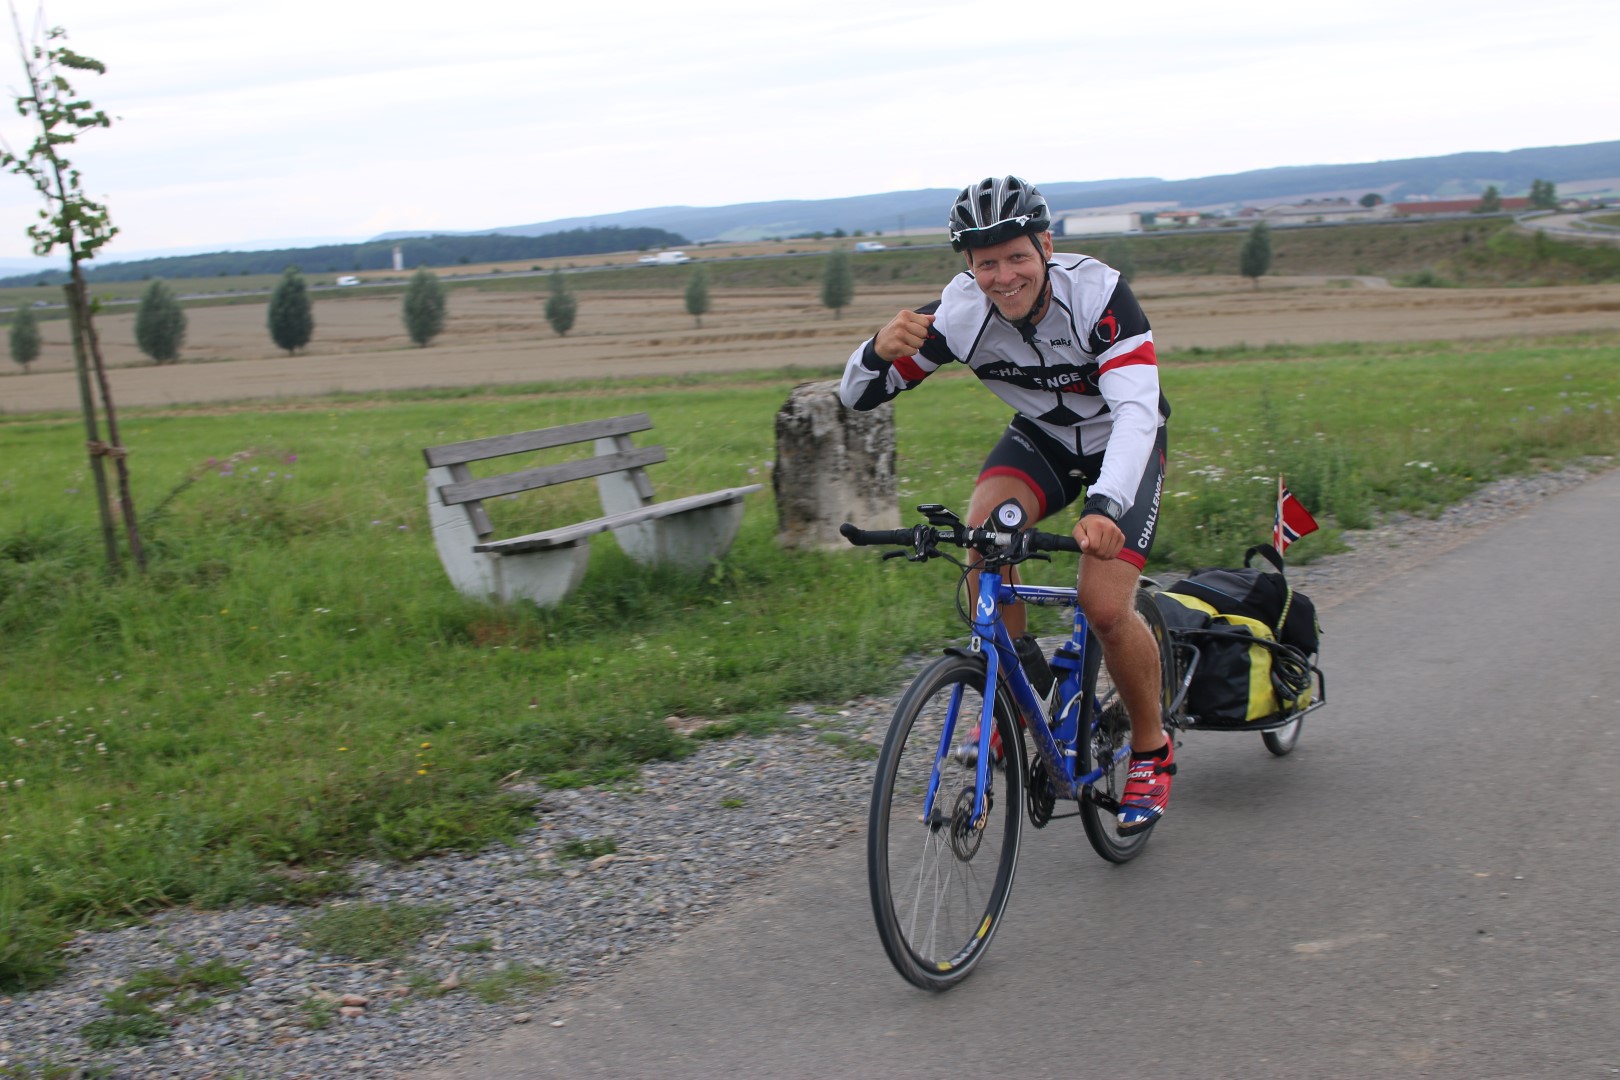 Cycling as far as possible before the rain hits me. The Czech boarder is getting closer every day